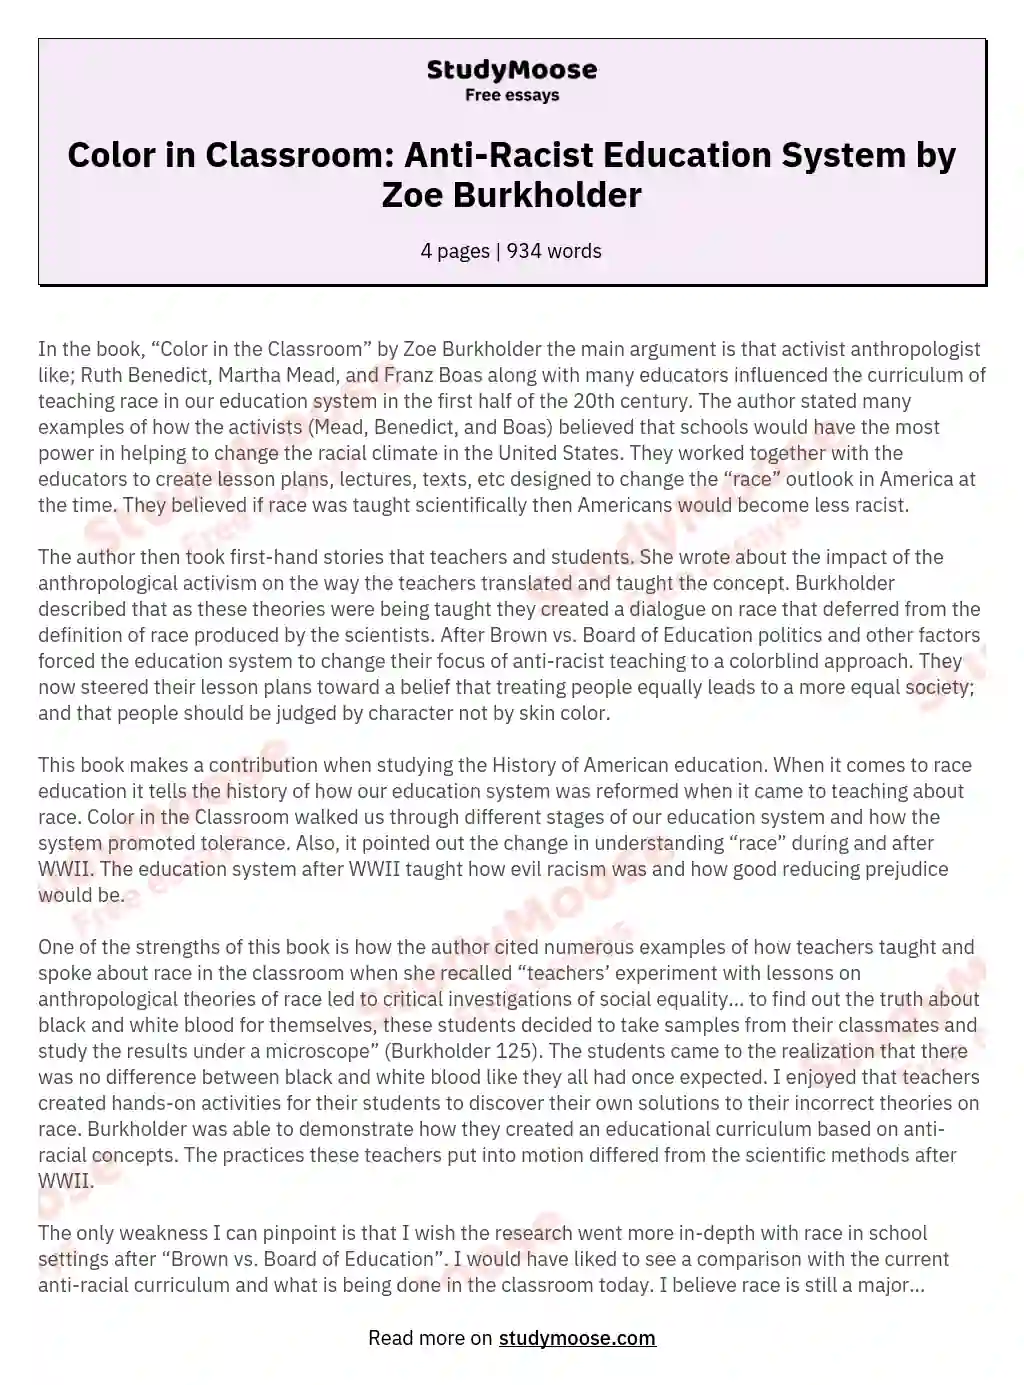 Color in Classroom: Anti-Racist Education System by Zoe Burkholder essay